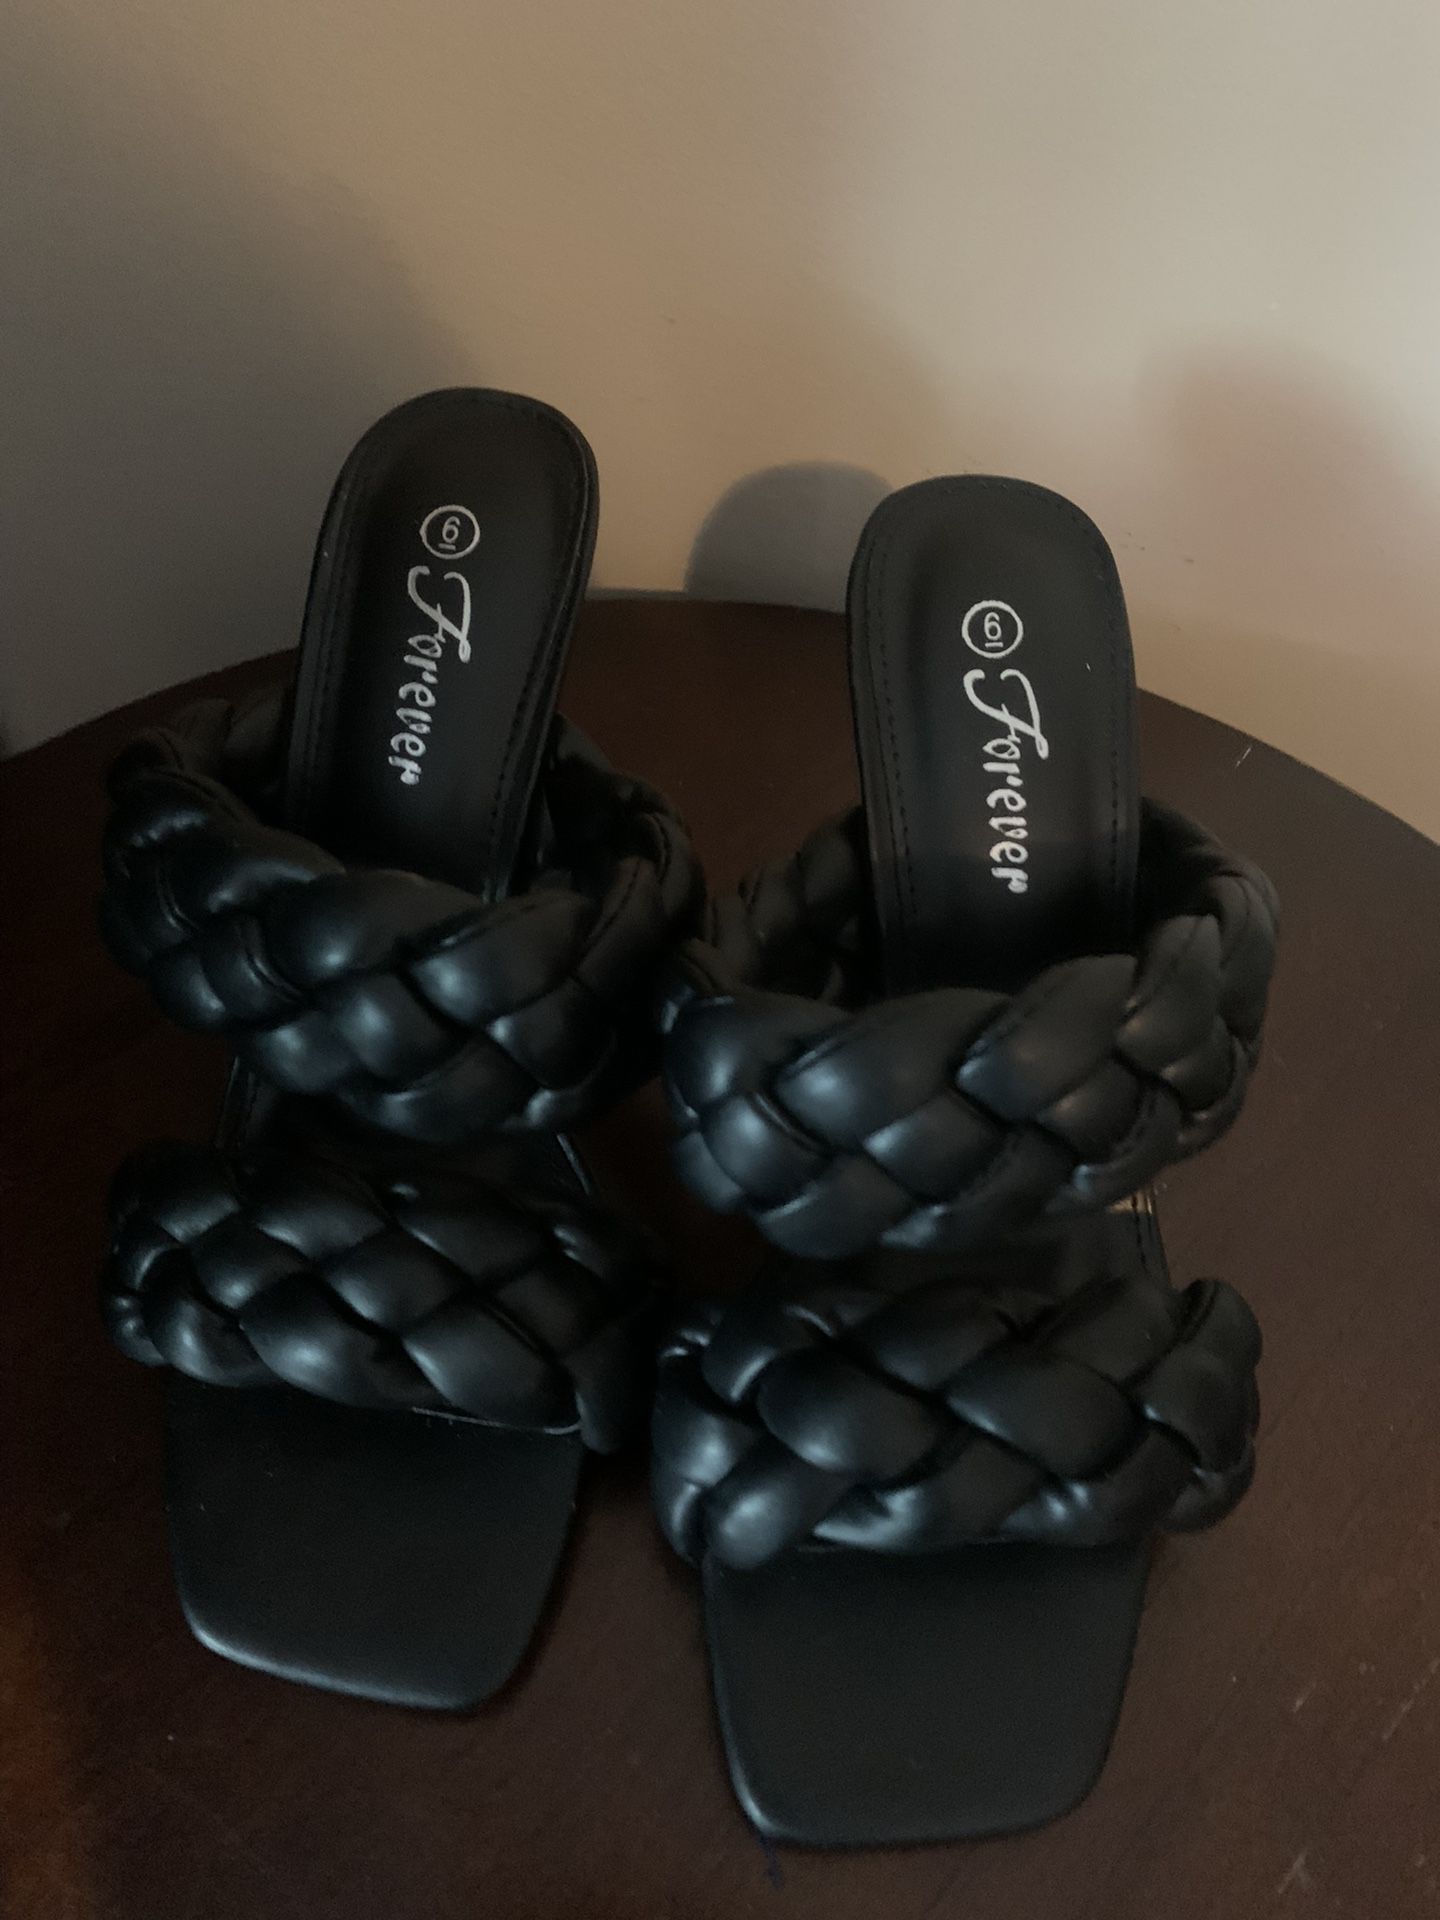 Sandals Shoes For Sale for Sale in West Covina, CA - OfferUp